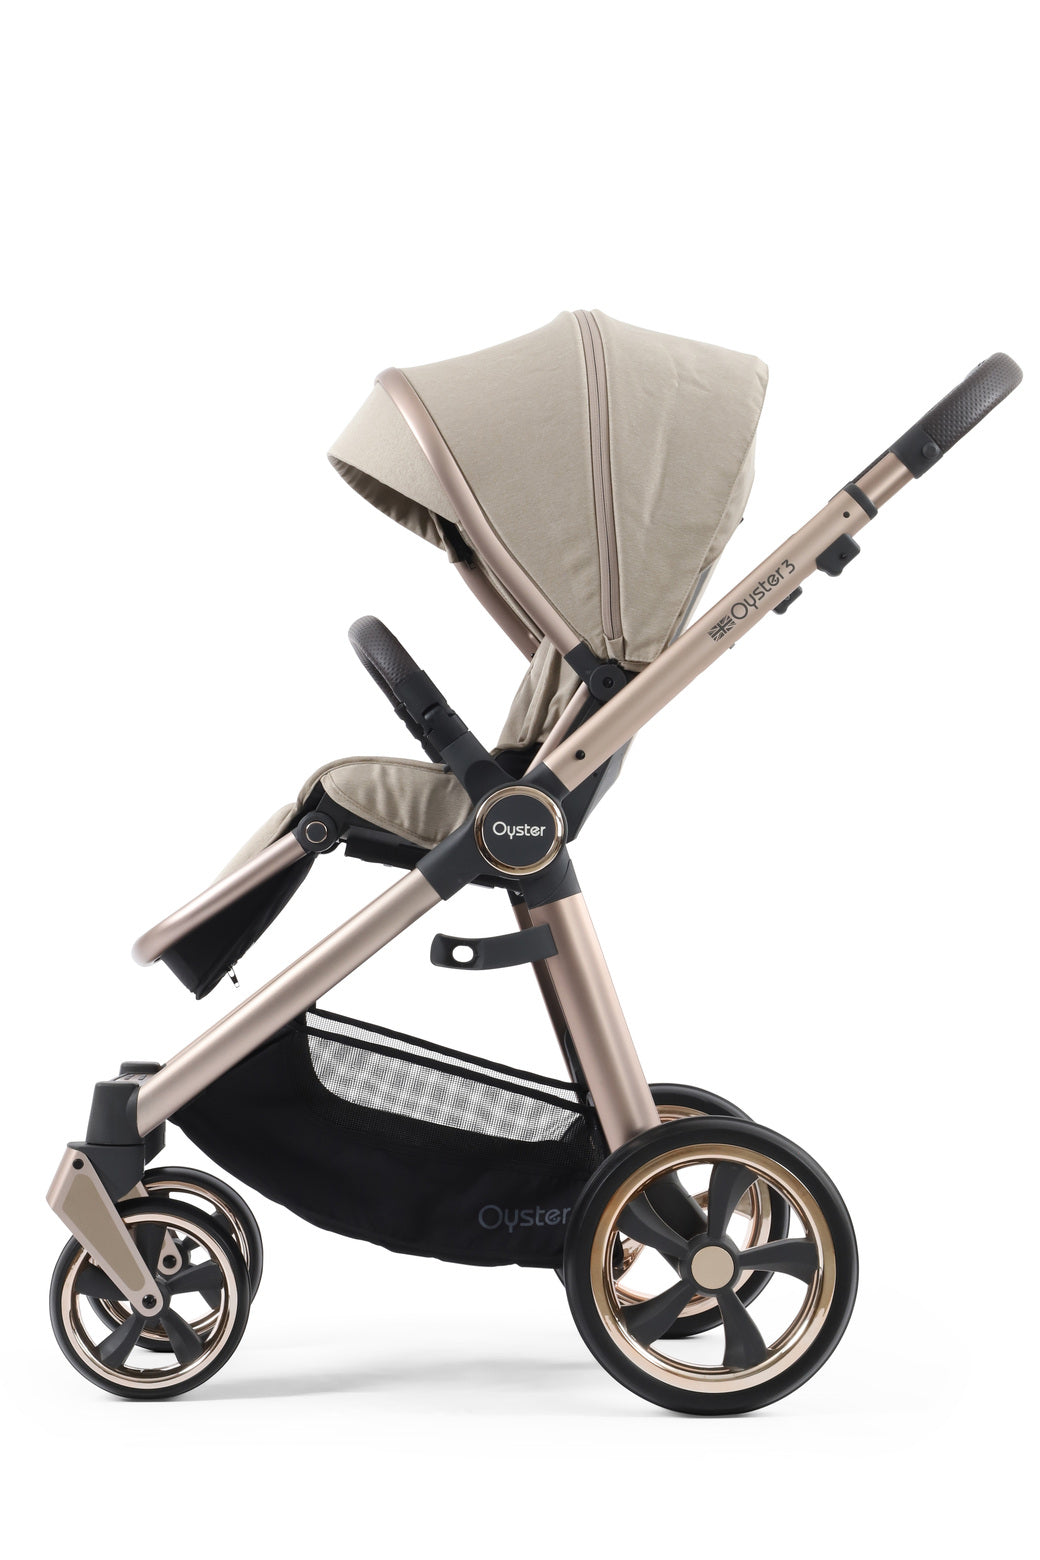 Babystyle Oyster 3 Luxury 7 Piece Travel System Bundle - Creme Brulee -  | For Your Little One